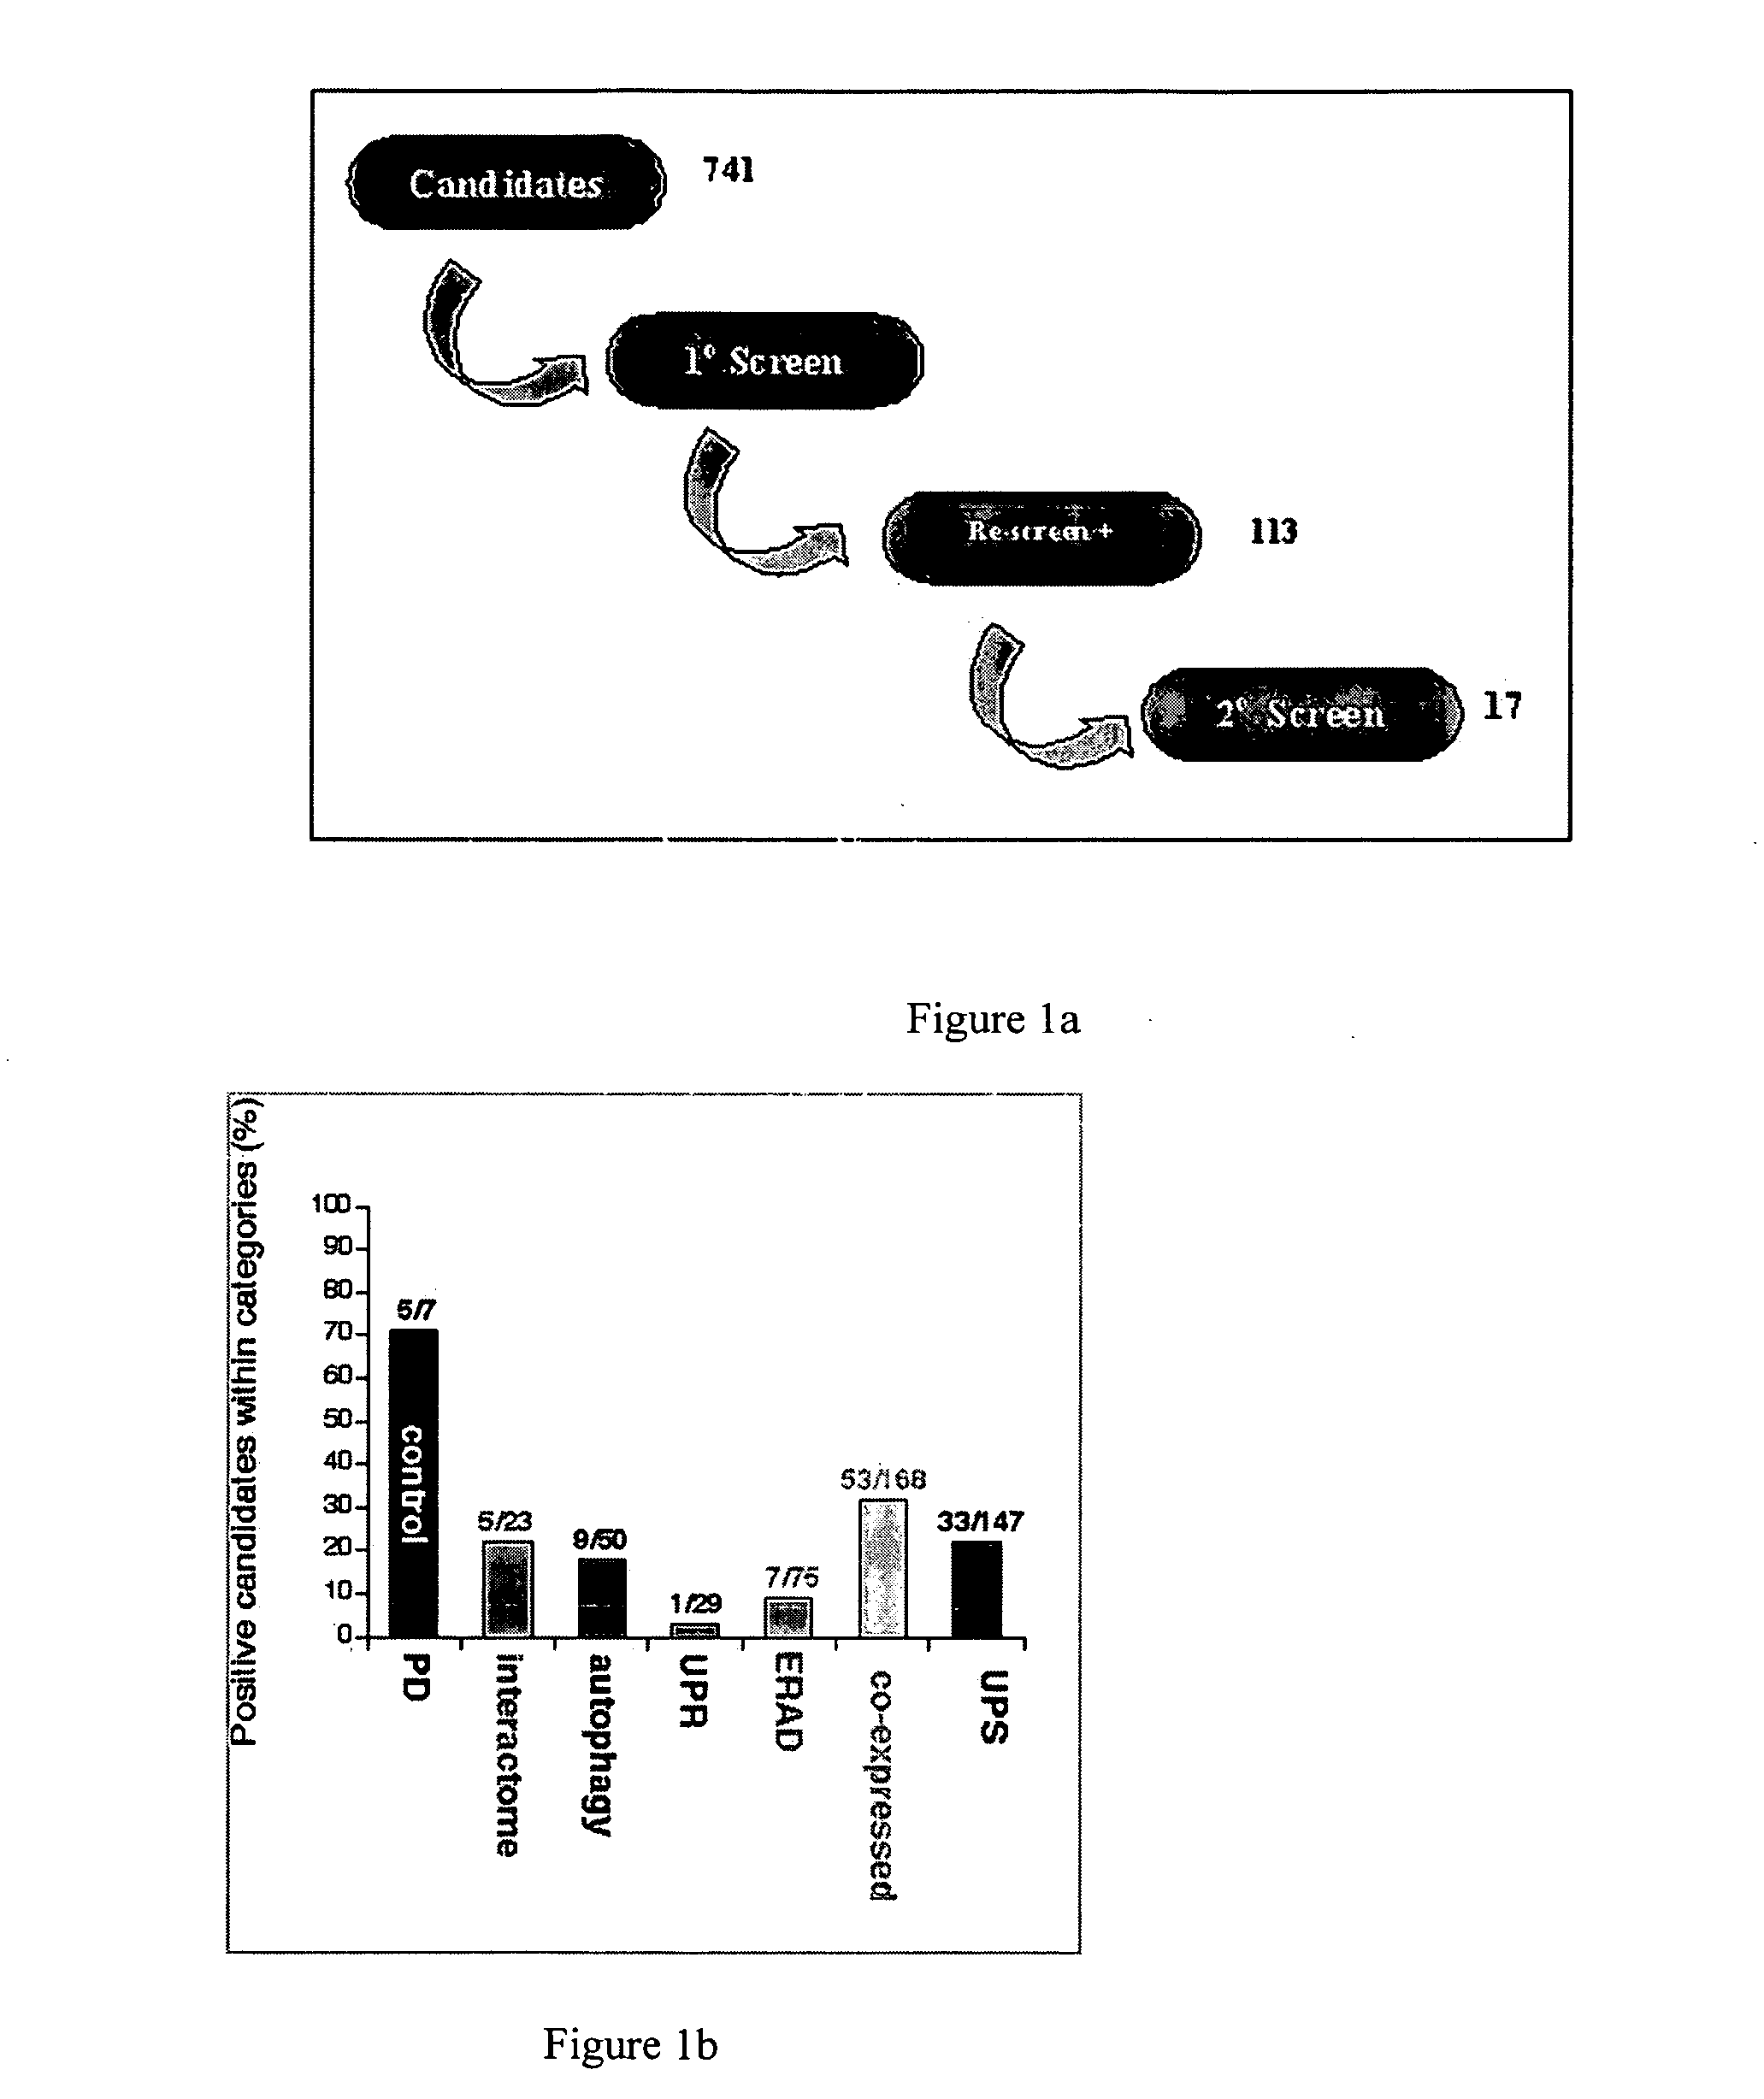 Regulators of protein misfolding and aggregation and methods of using the same